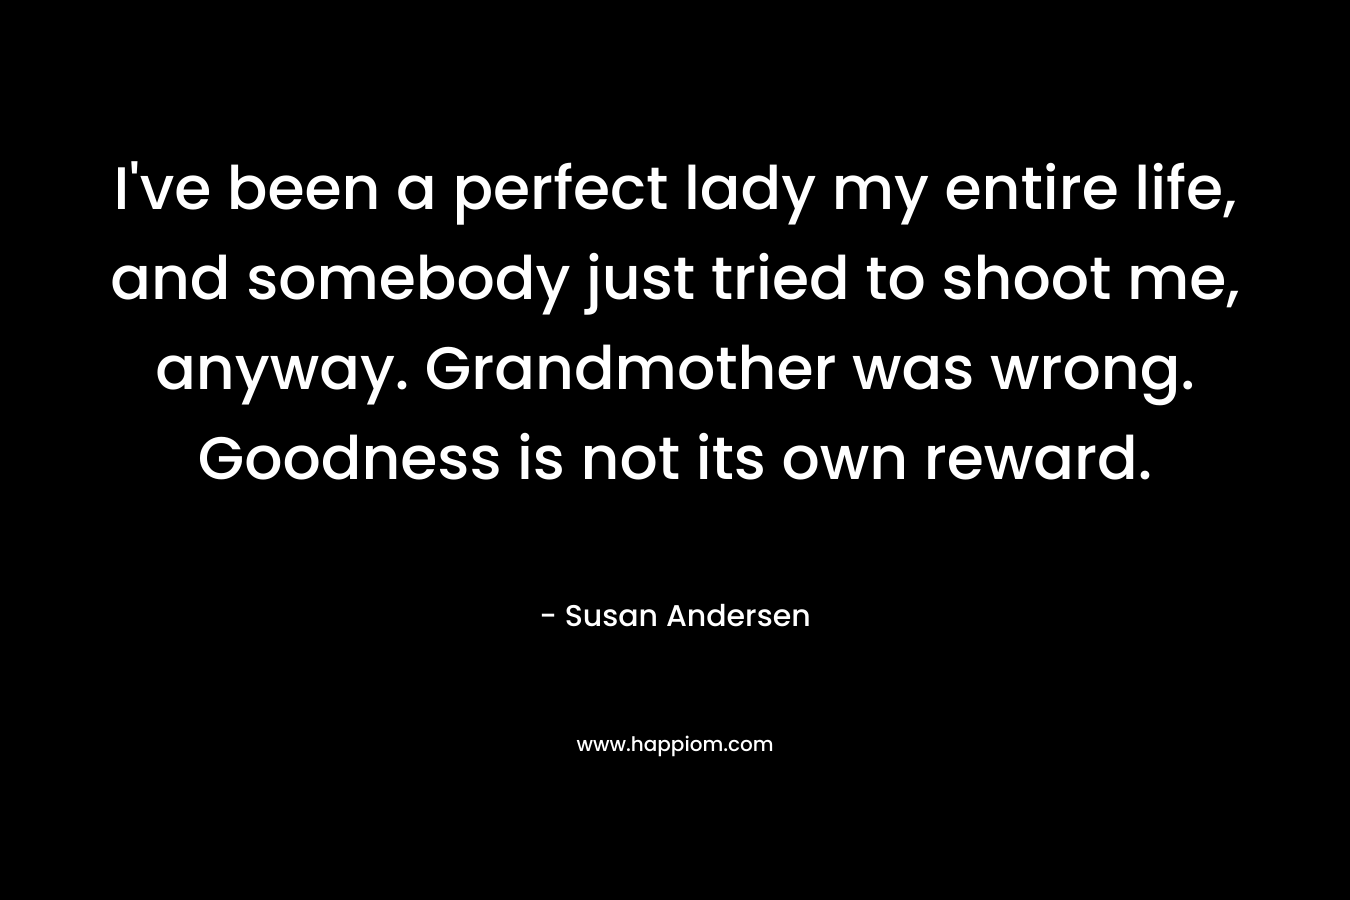 I’ve been a perfect lady my entire life, and somebody just tried to shoot me, anyway. Grandmother was wrong. Goodness is not its own reward. – Susan Andersen